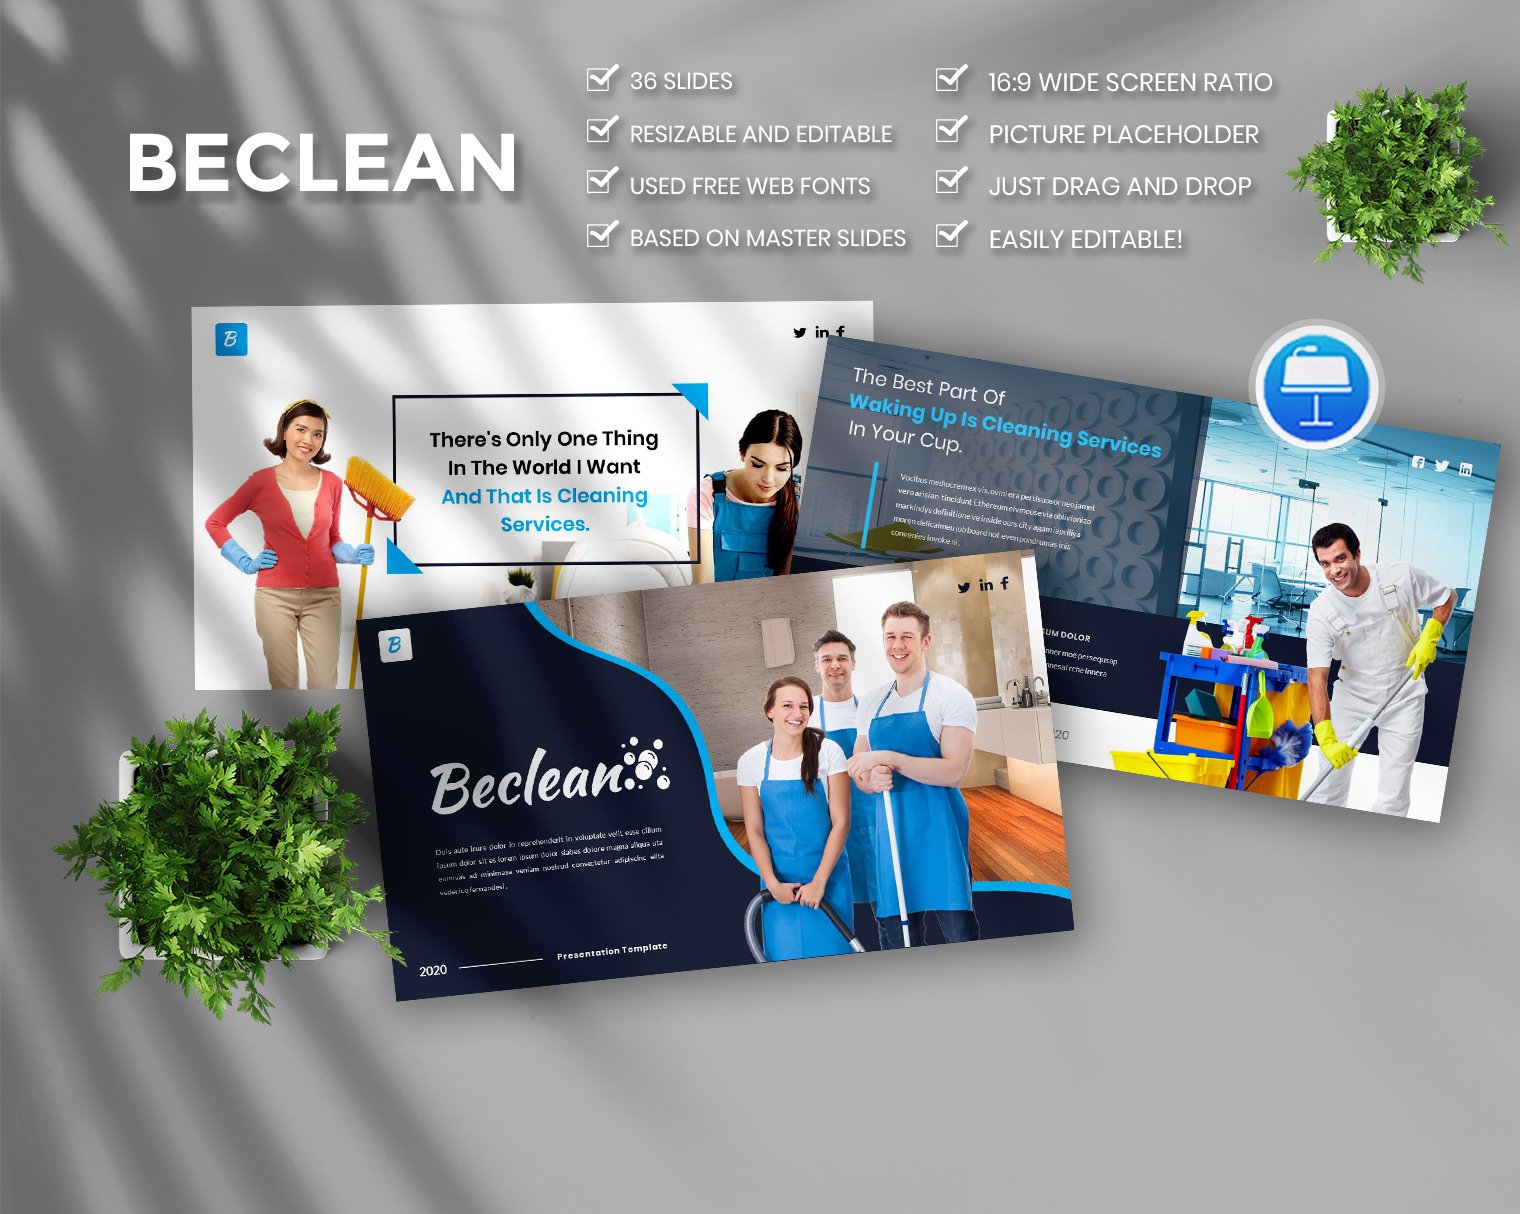 Beclean  Cleaning Services Keynote cover image.